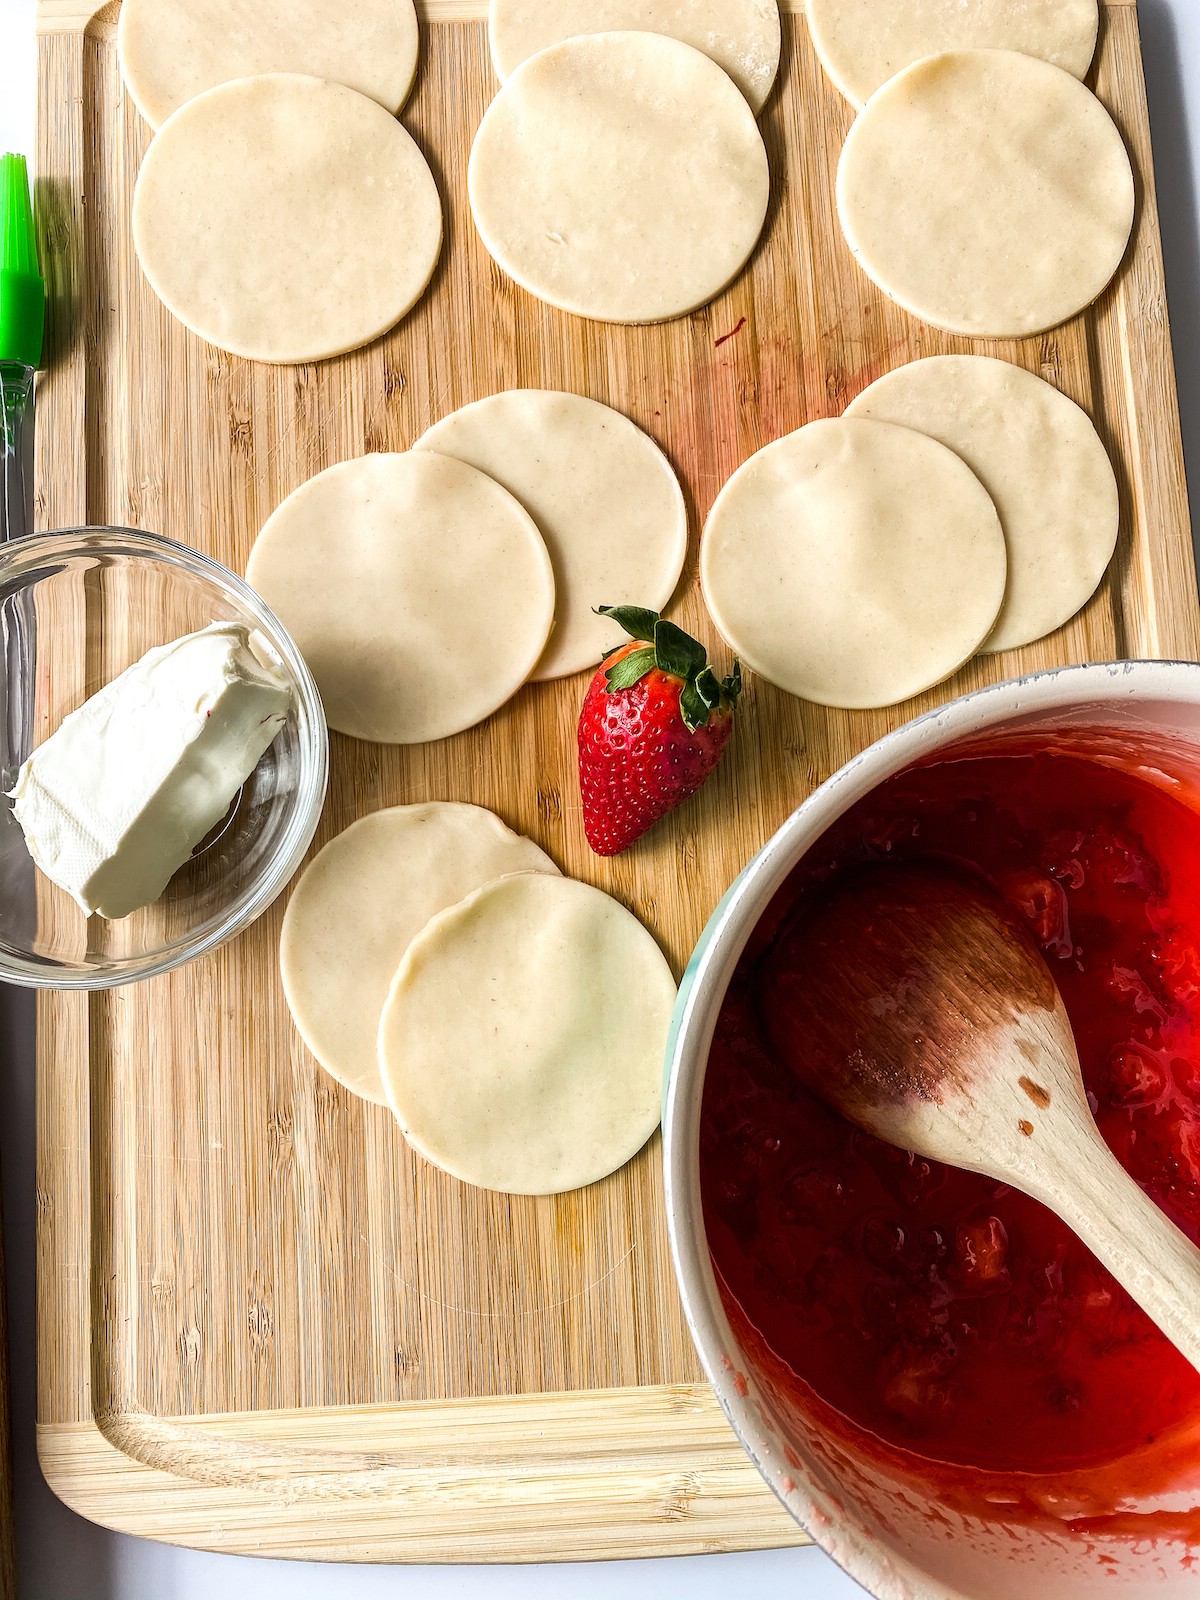 Dough rounds on cutting board by pot of strawberry jam